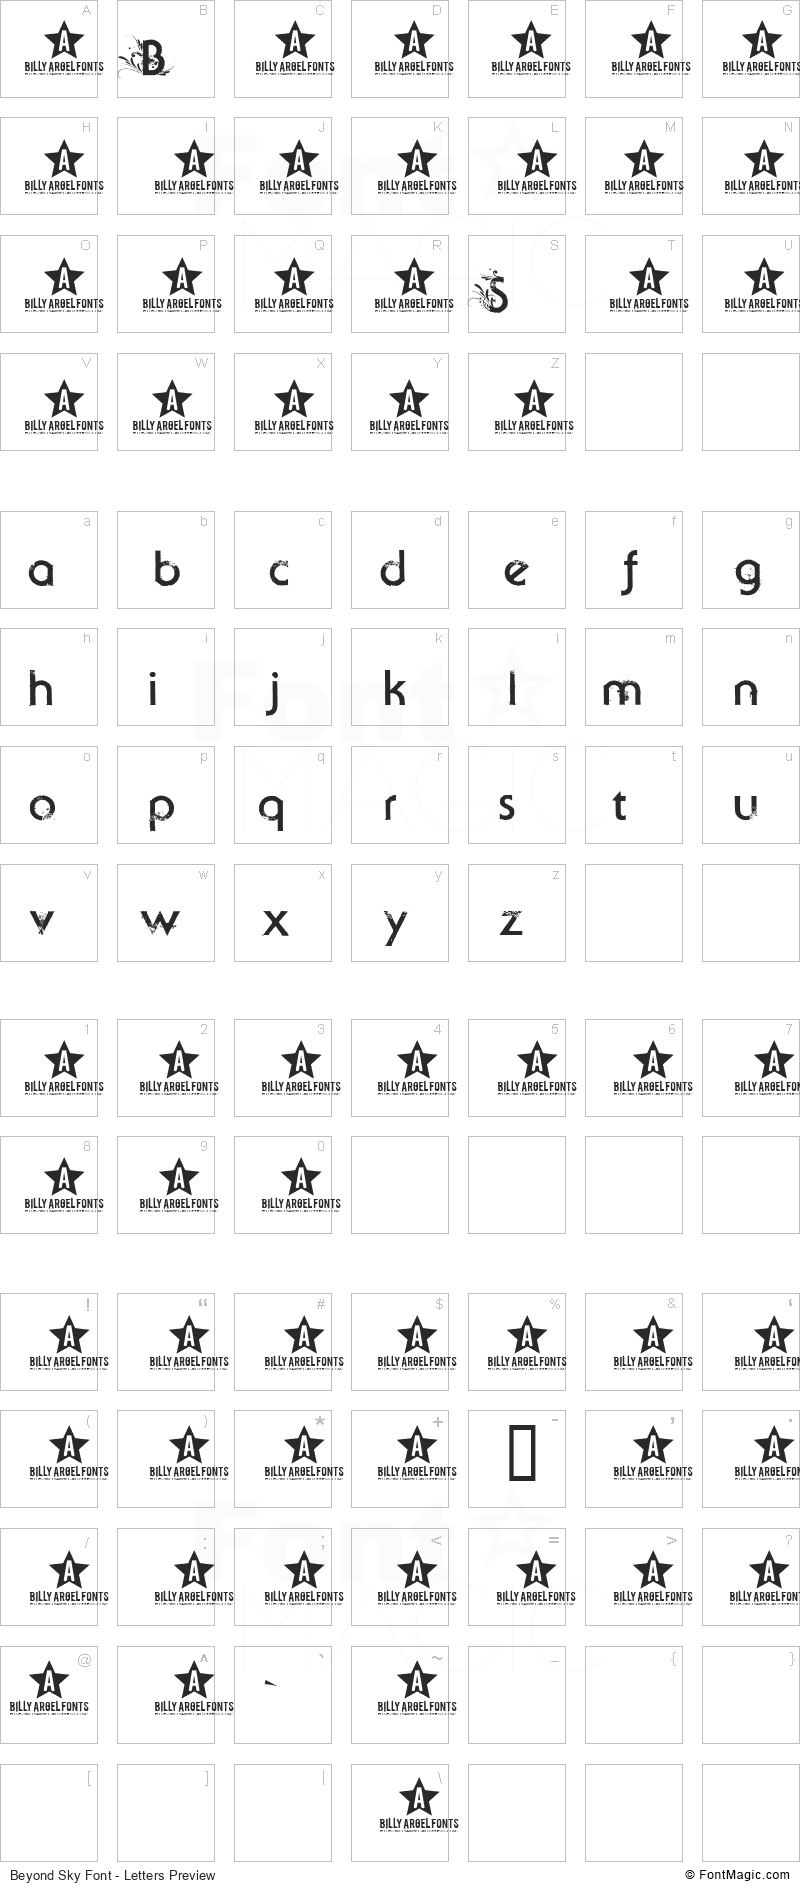 Beyond Sky Font - All Latters Preview Chart